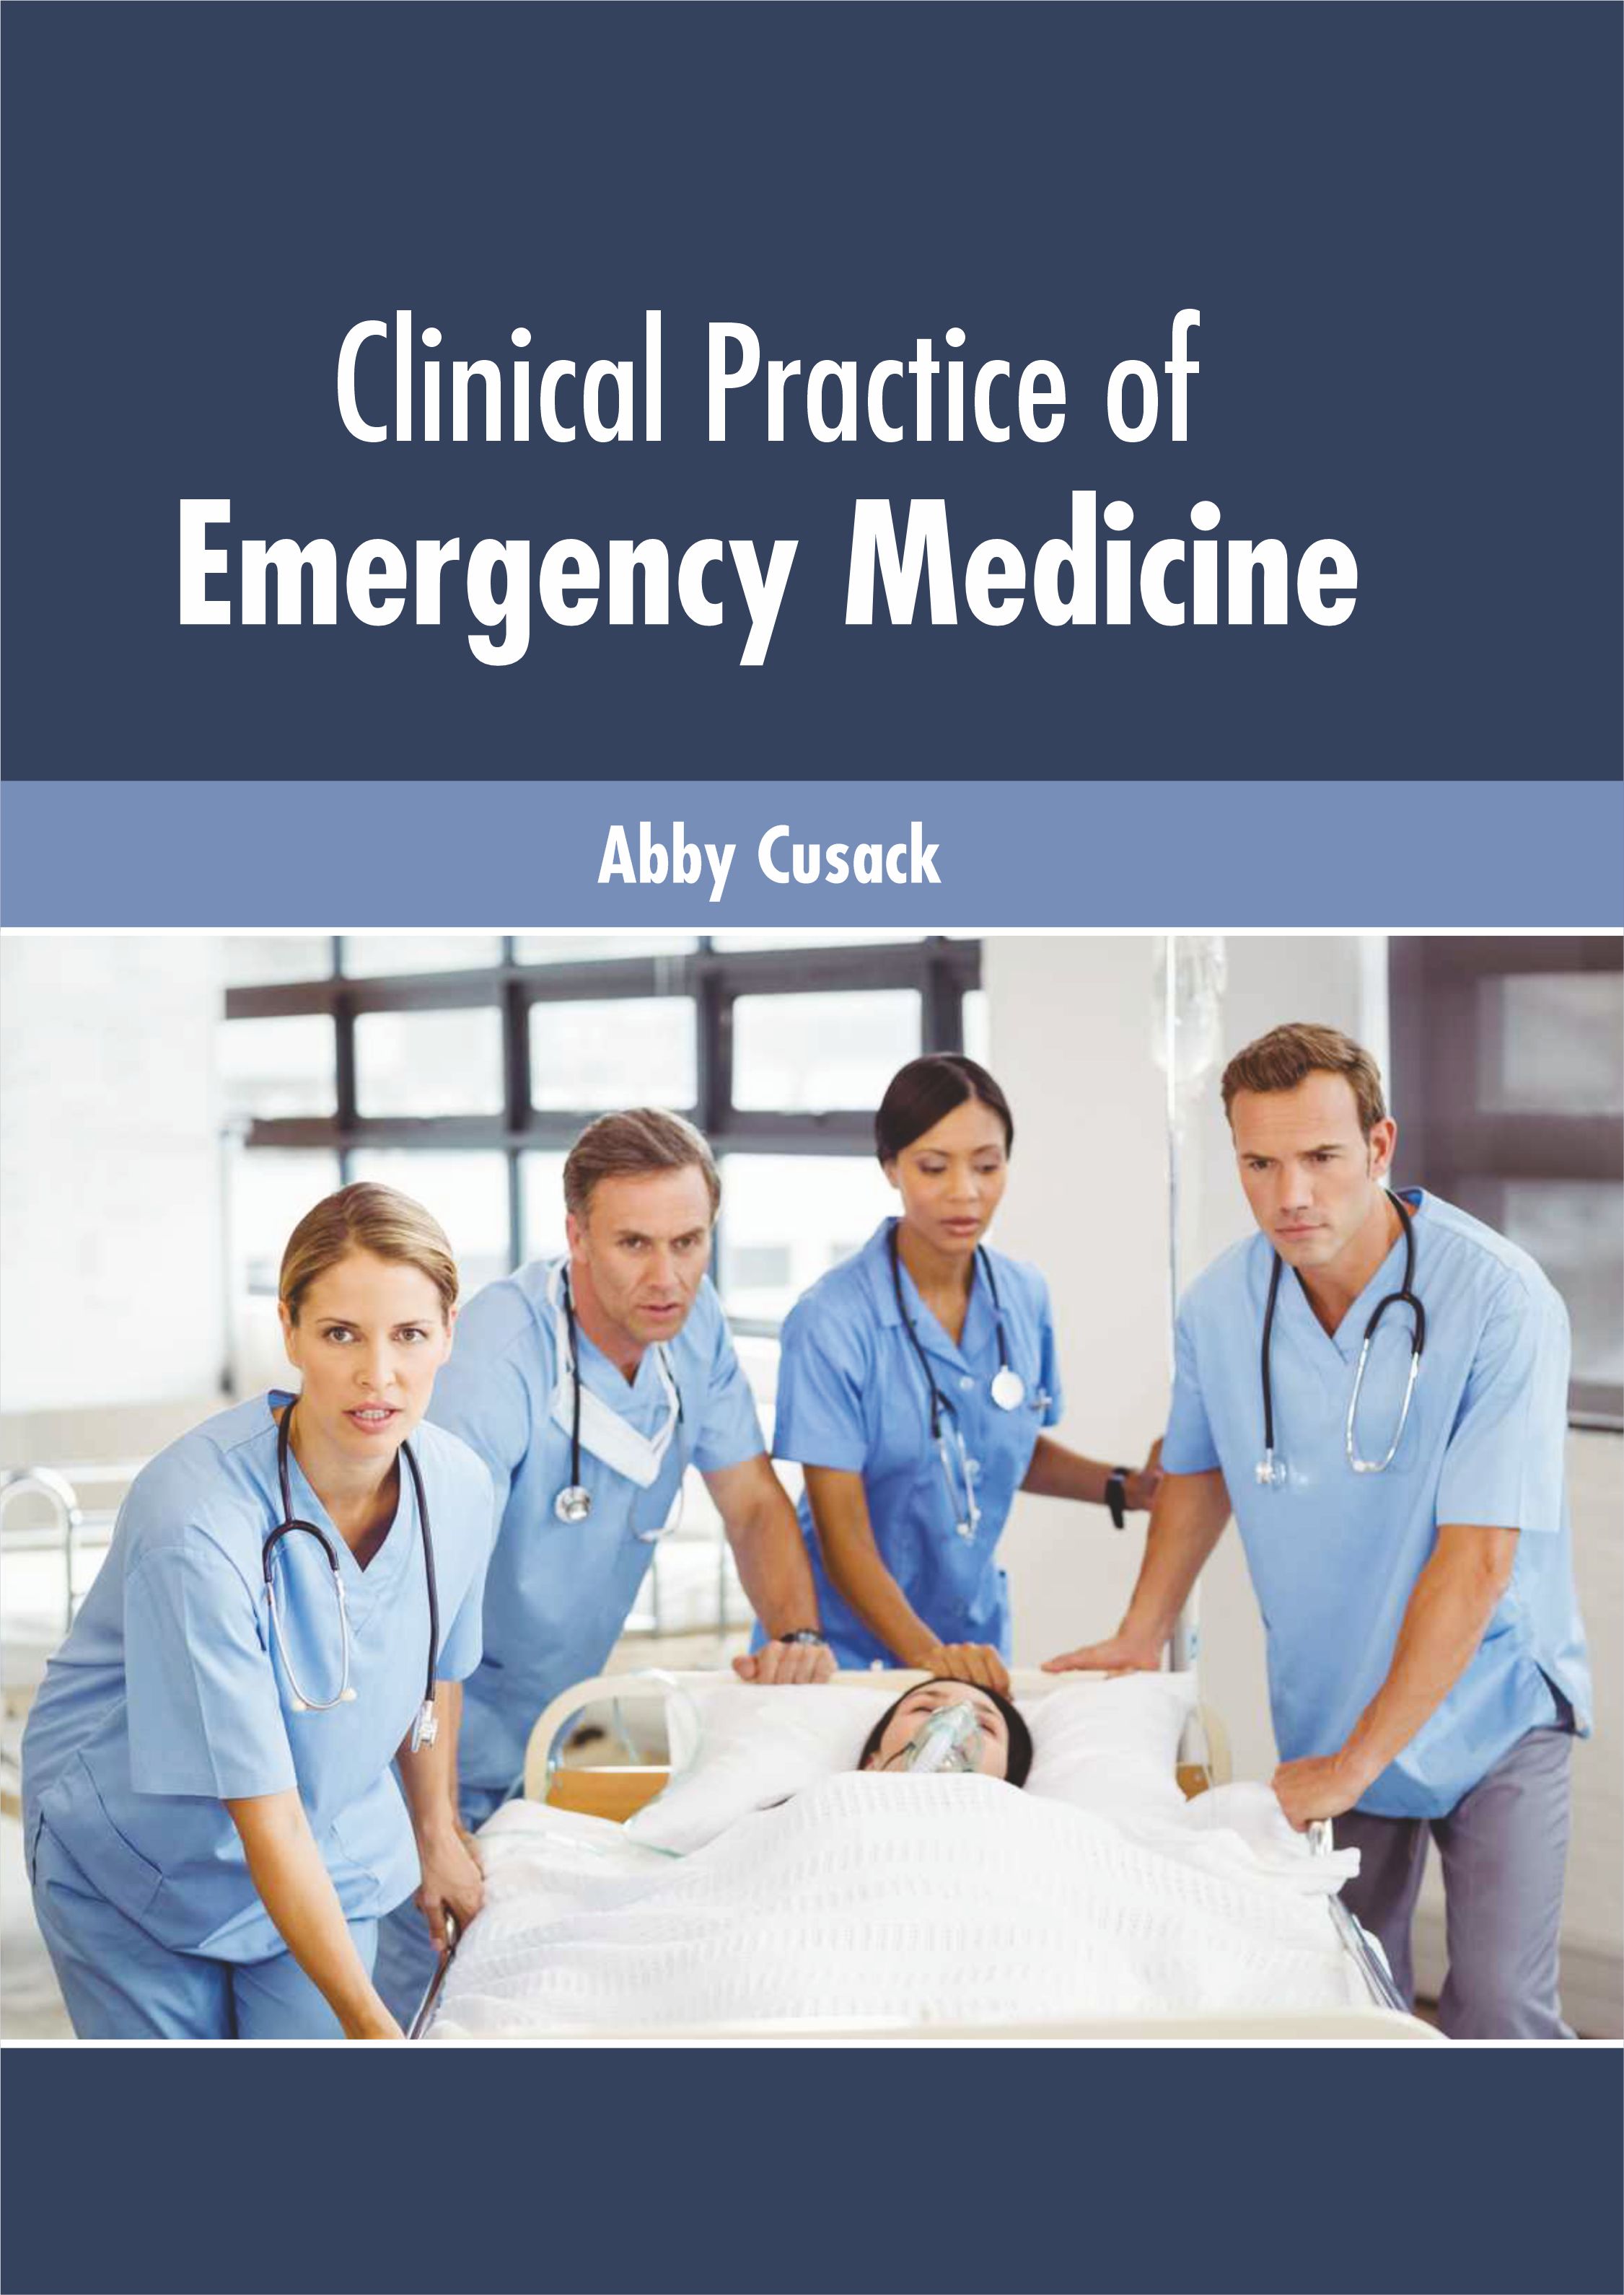 CLINICAL PRACTICE OF EMERGENCY MEDICINE